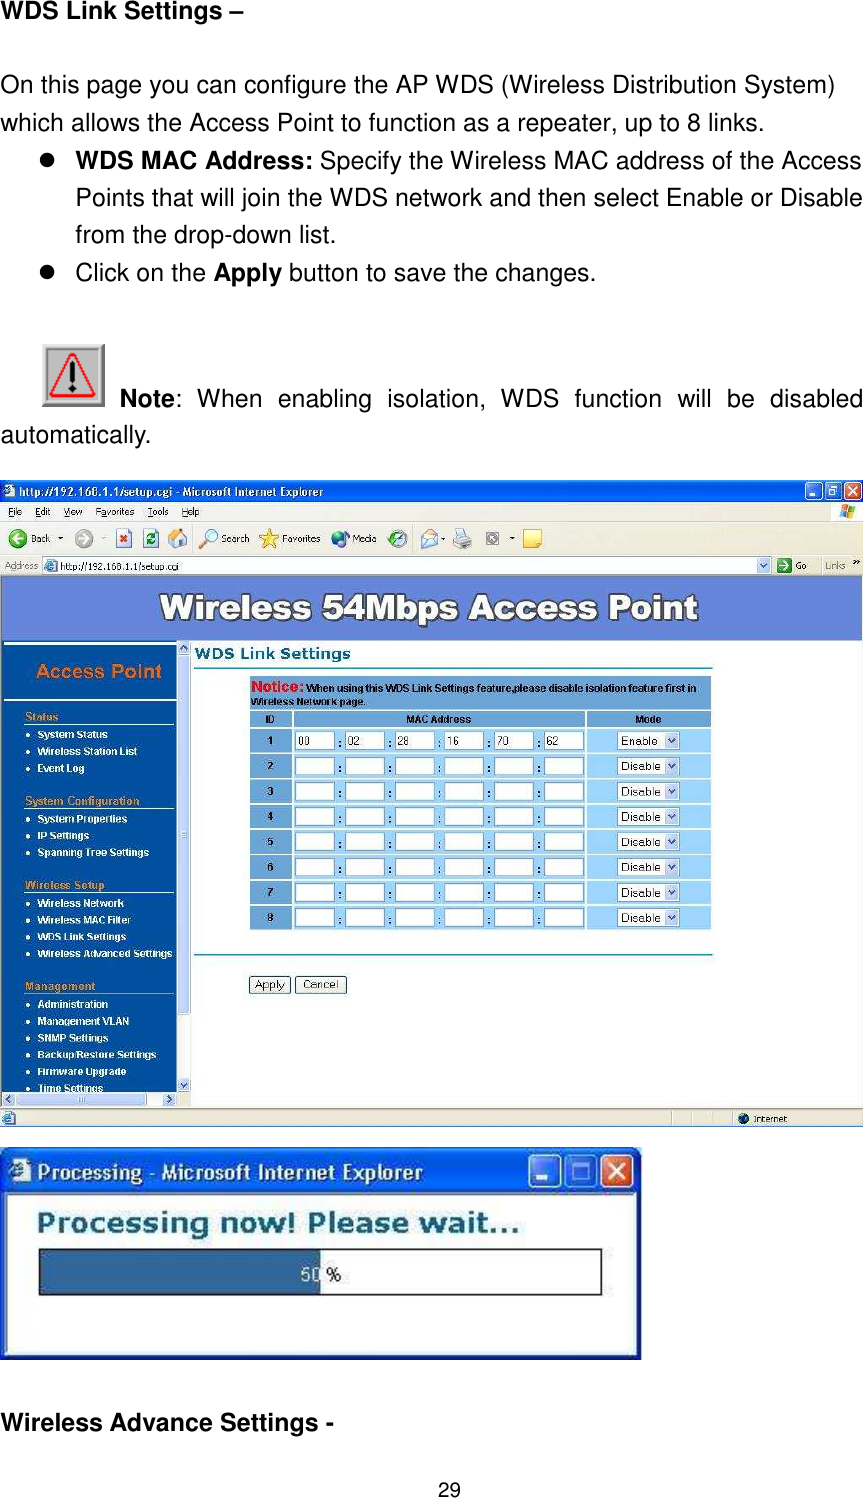  29 WDS Link Settings –  On this page you can configure the AP WDS (Wireless Distribution System) which allows the Access Point to function as a repeater, up to 8 links.  WDS MAC Address: Specify the Wireless MAC address of the Access Points that will join the WDS network and then select Enable or Disable from the drop-down list.   Click on the Apply button to save the changes.     Note:  When  enabling  isolation,  WDS  function  will  be  disabled automatically.    Wireless Advance Settings -   